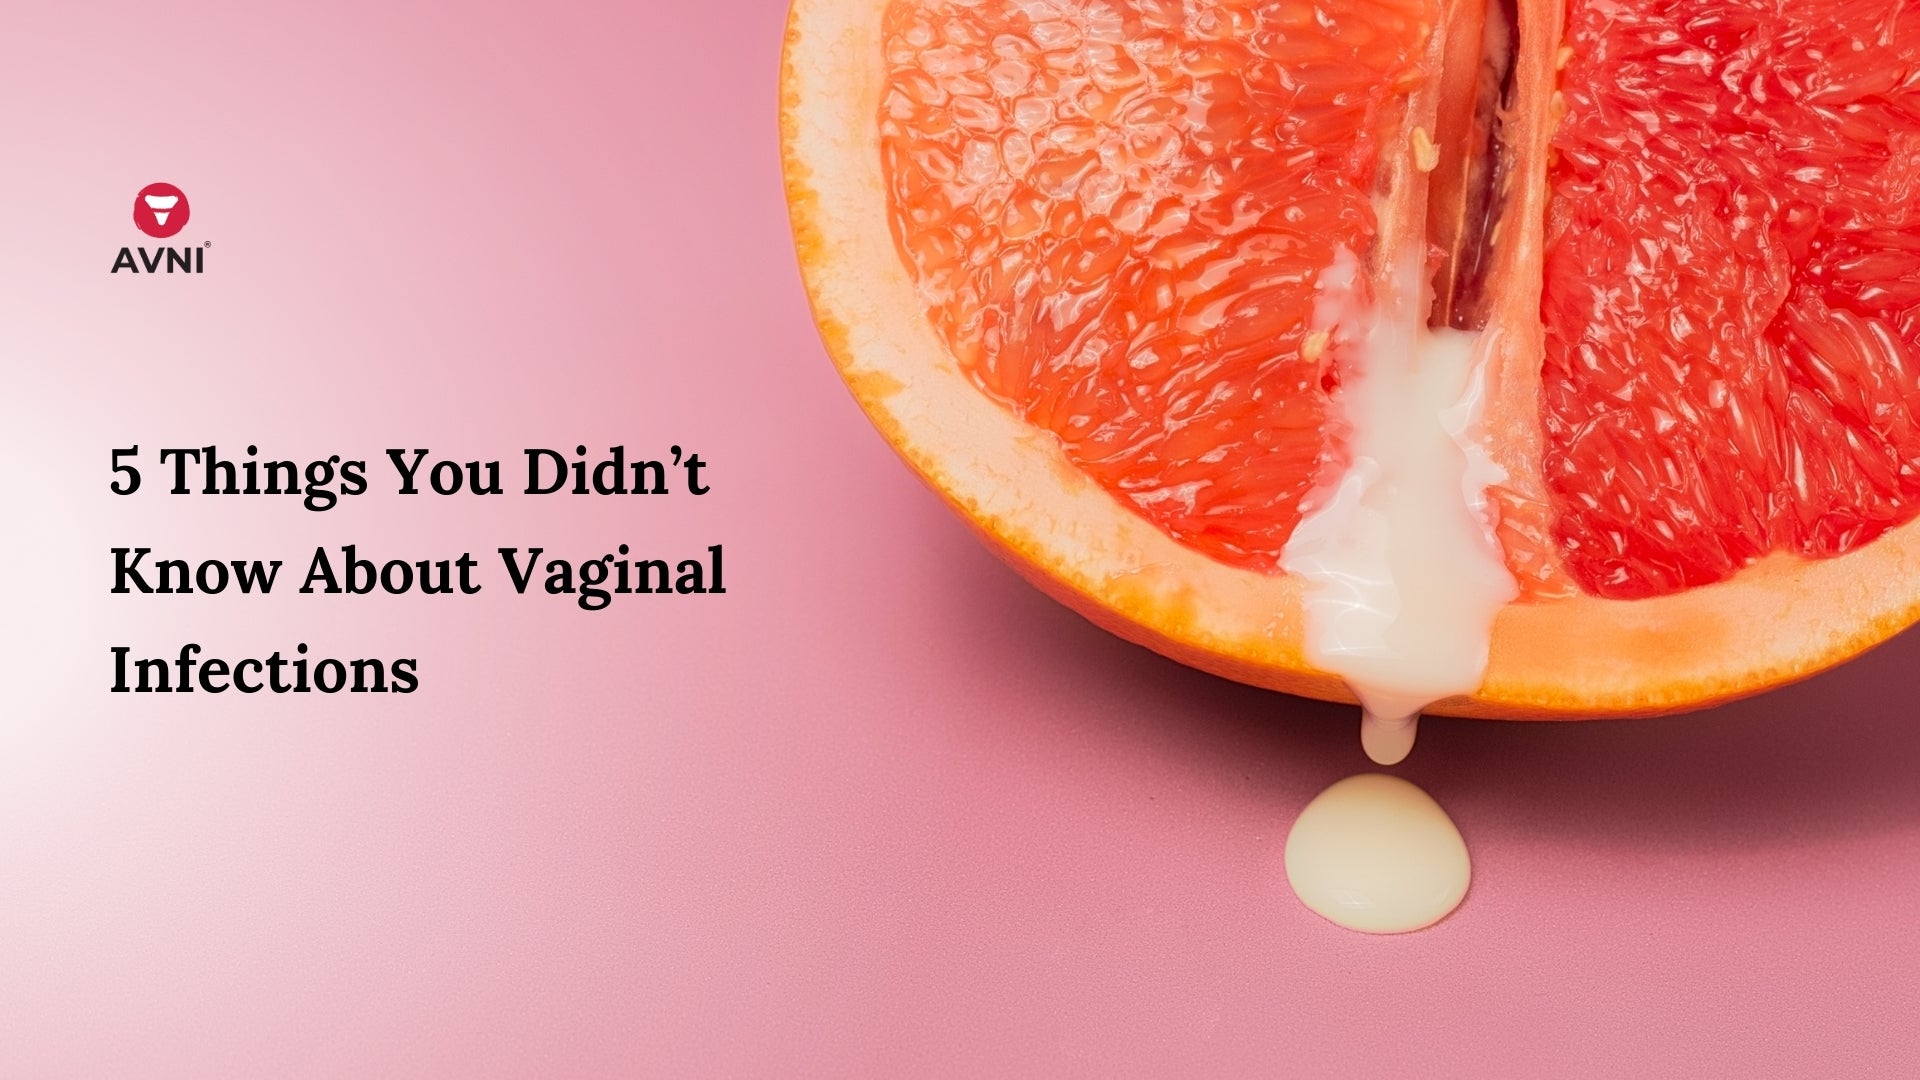 5 Things You Didn’t Know About Vaginal Infections